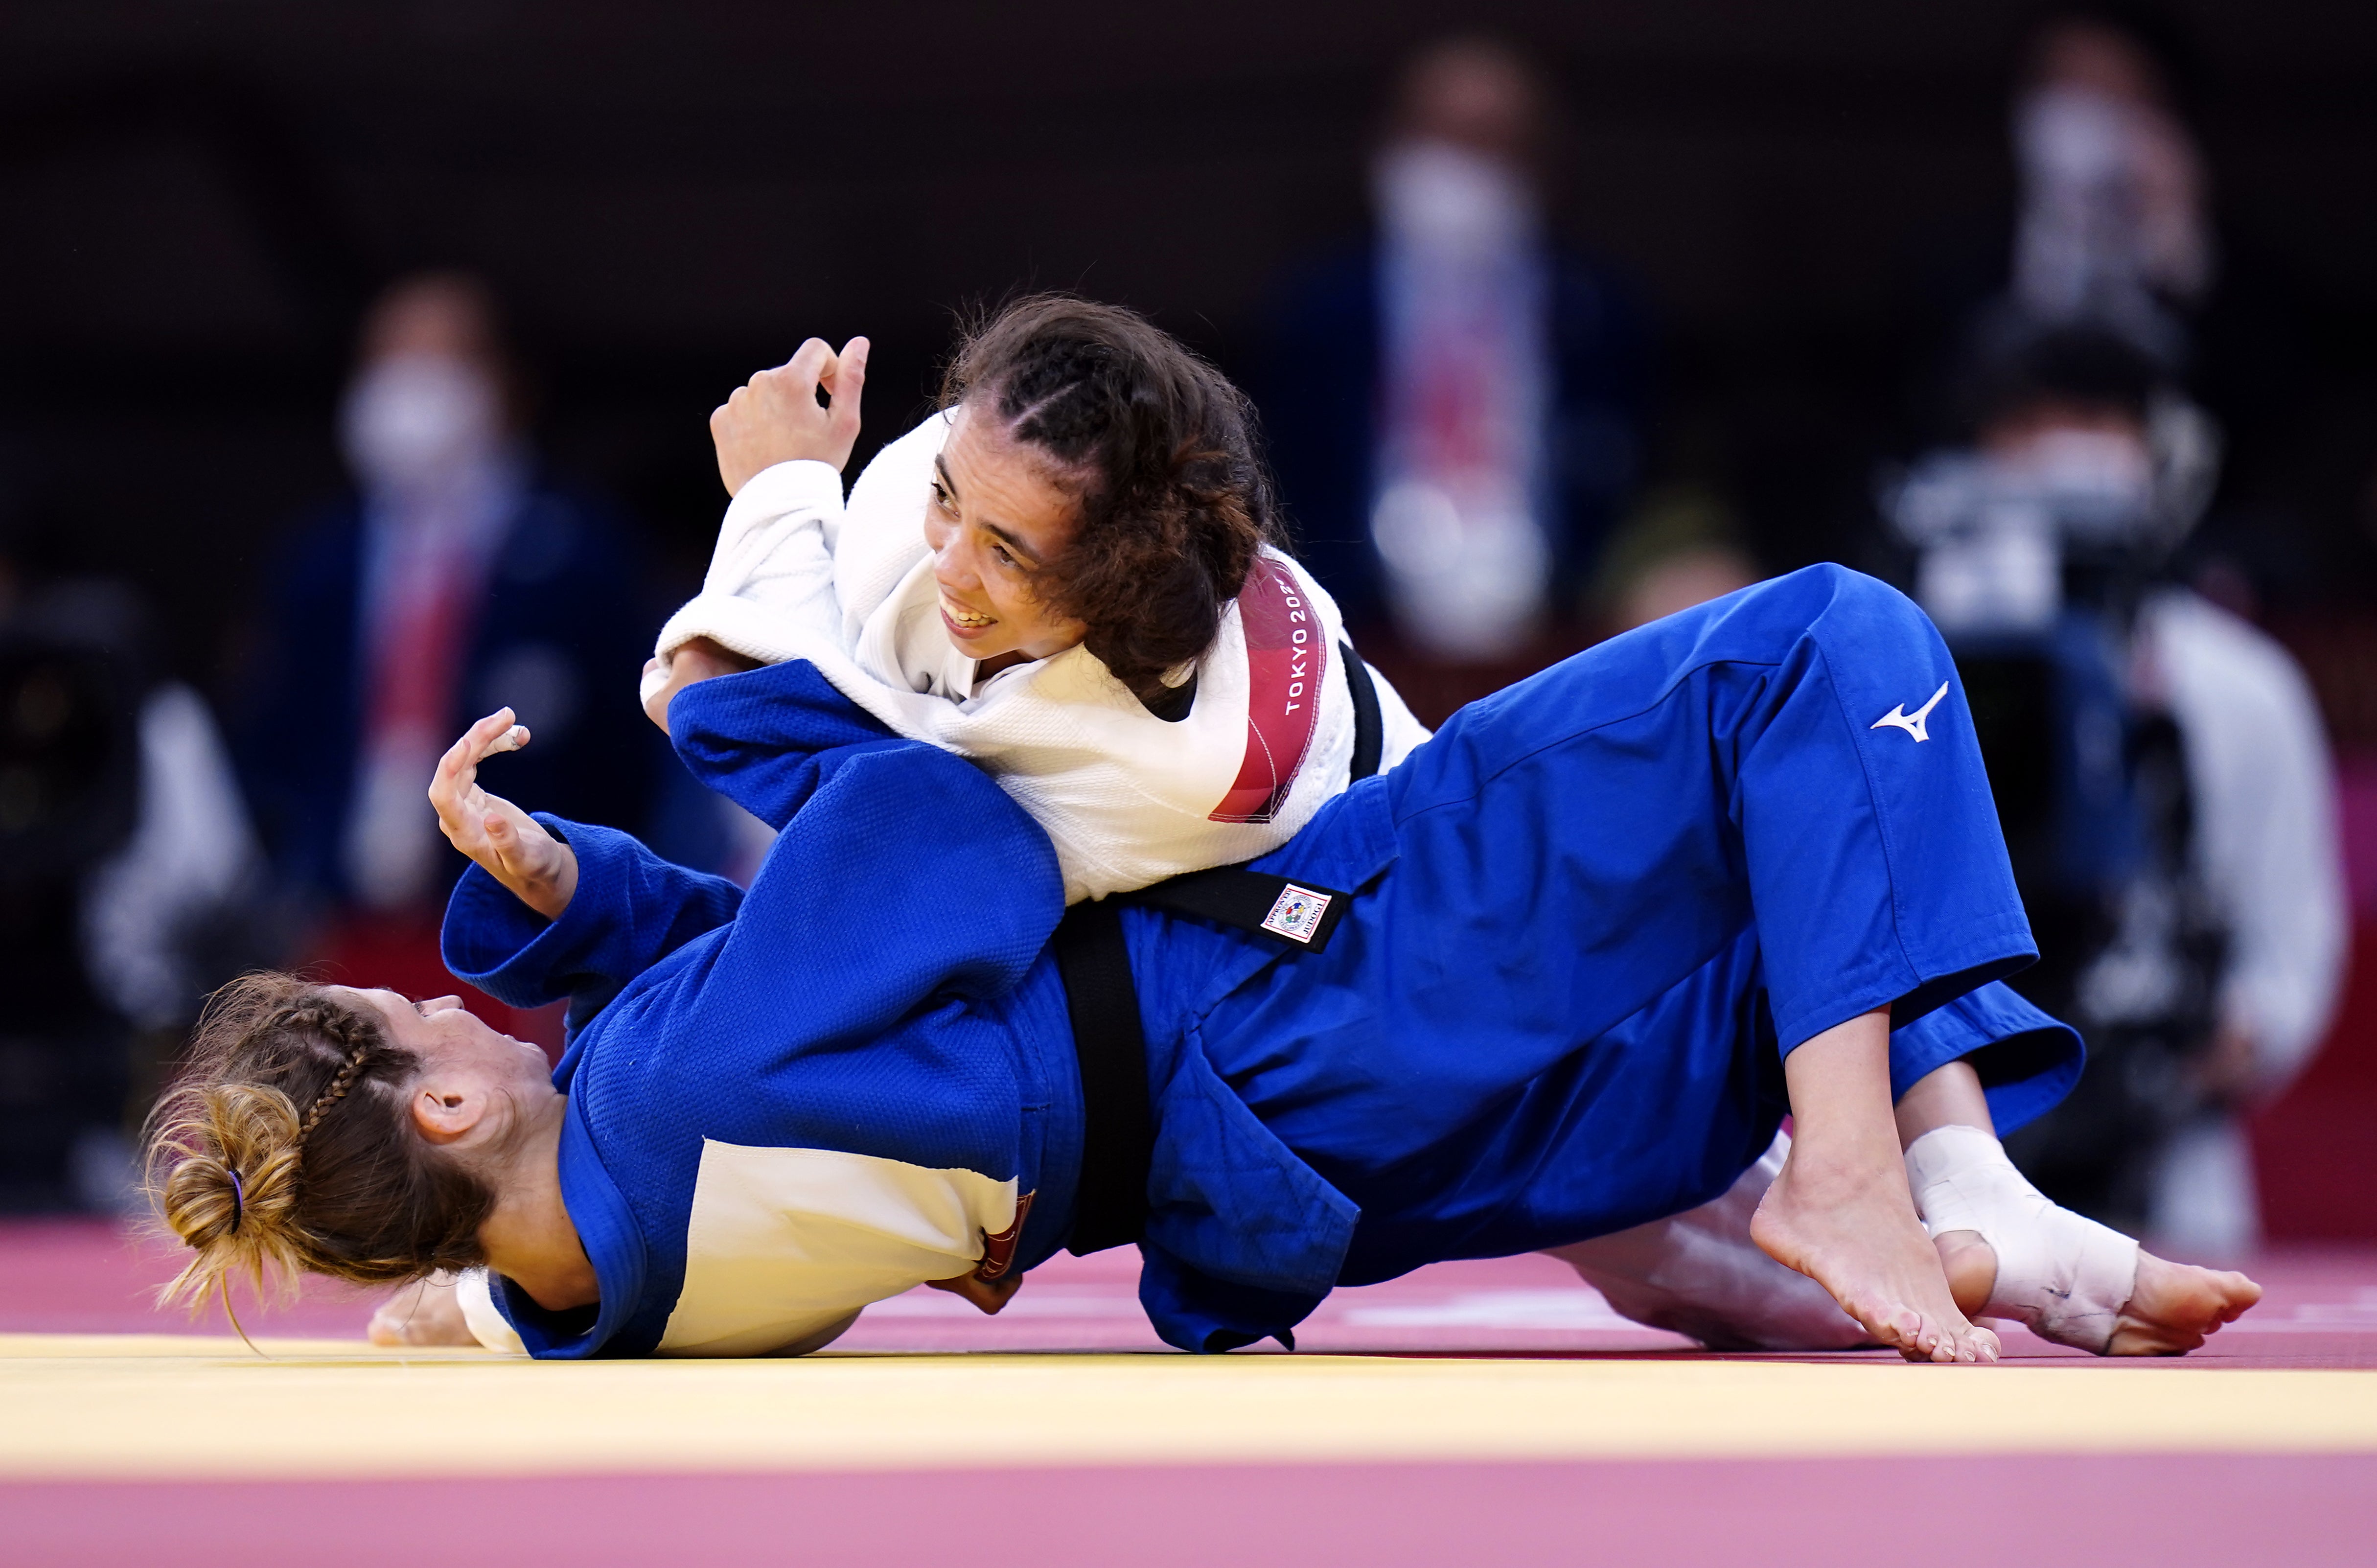 The match-winning moment Chelsie Giles defeated Switzerland’s Fabienne Kocher in the women’s -52kg judo to win Britain’s first medal of Tokyo Olympics with bronze (Danny Lawson/PA)